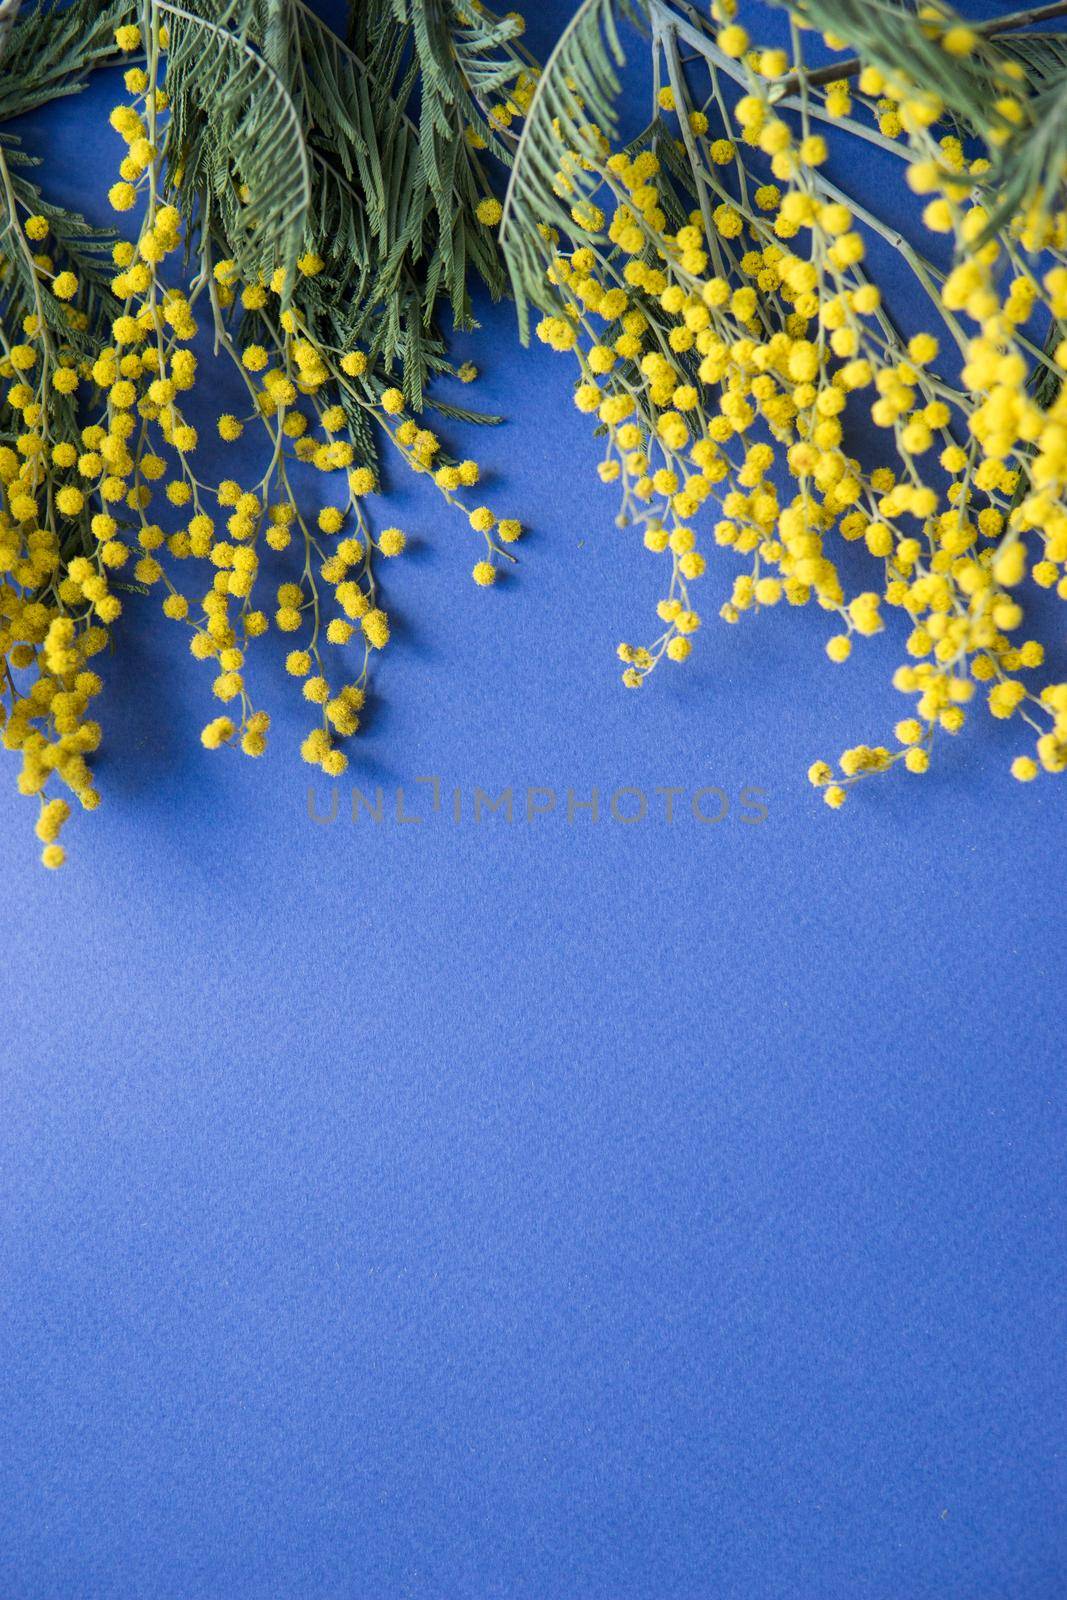 Spring concert. Mimosa on a blue background. Mimosa close-up. Happy spring. by Annu1tochka